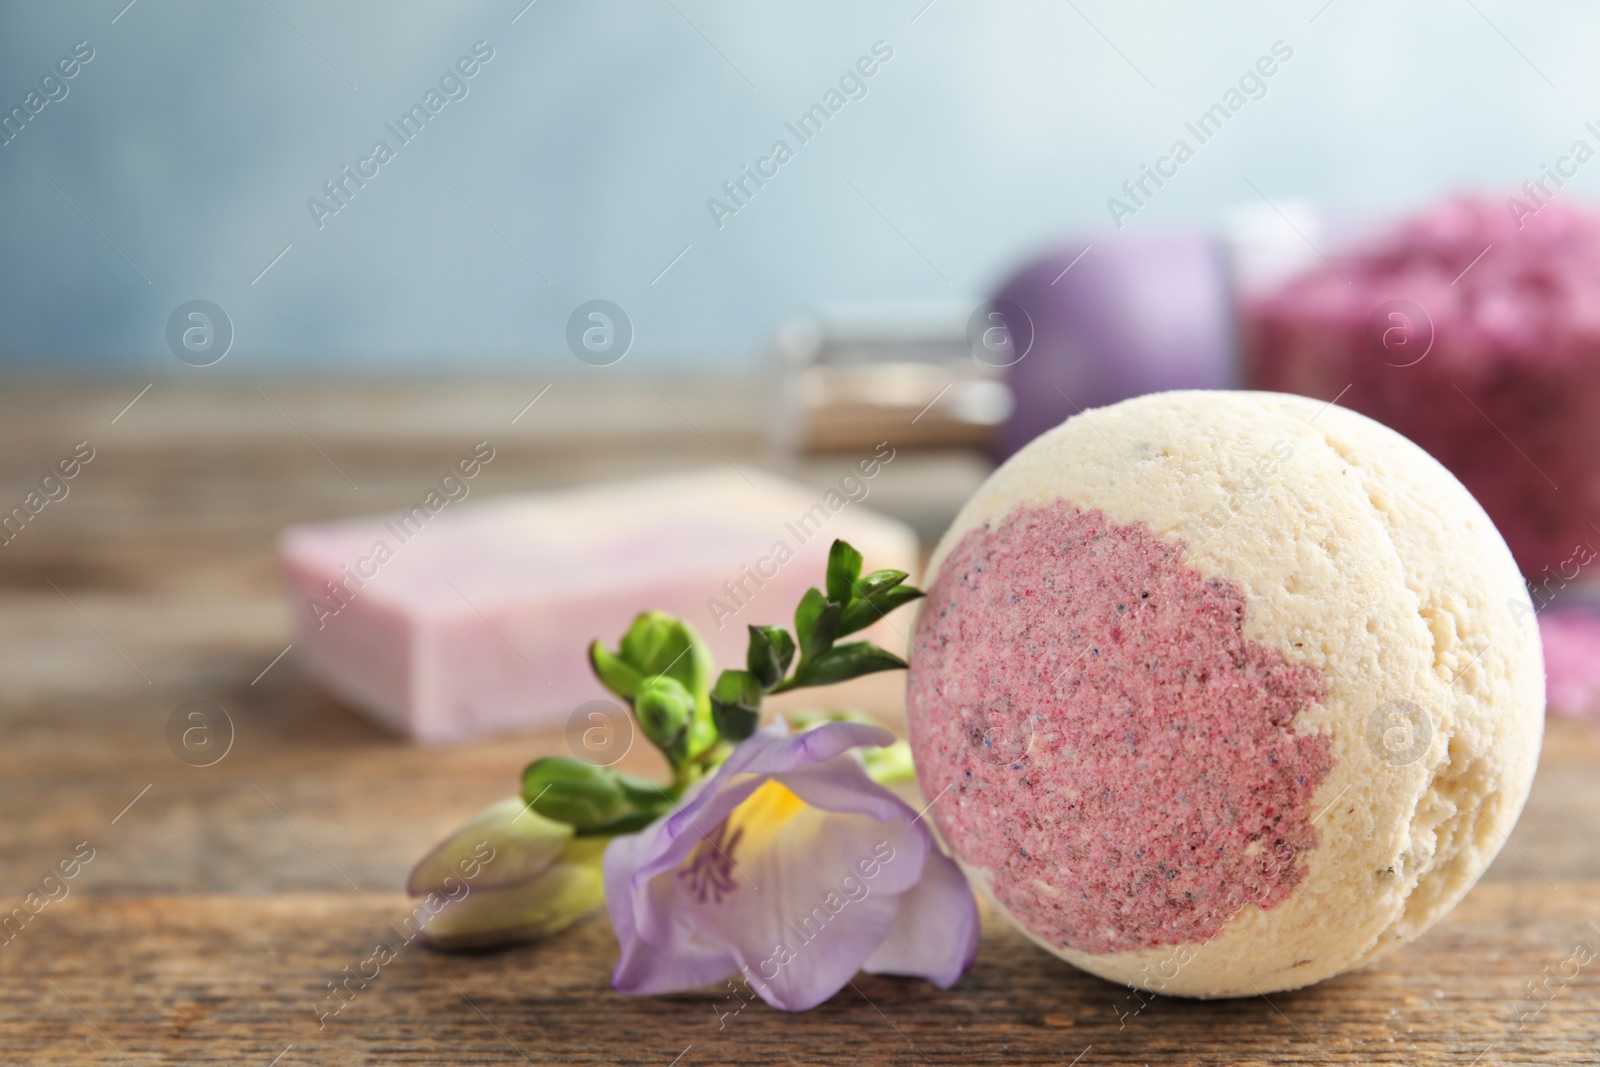 Photo of Bath bomb and flower on wooden table. Space for text